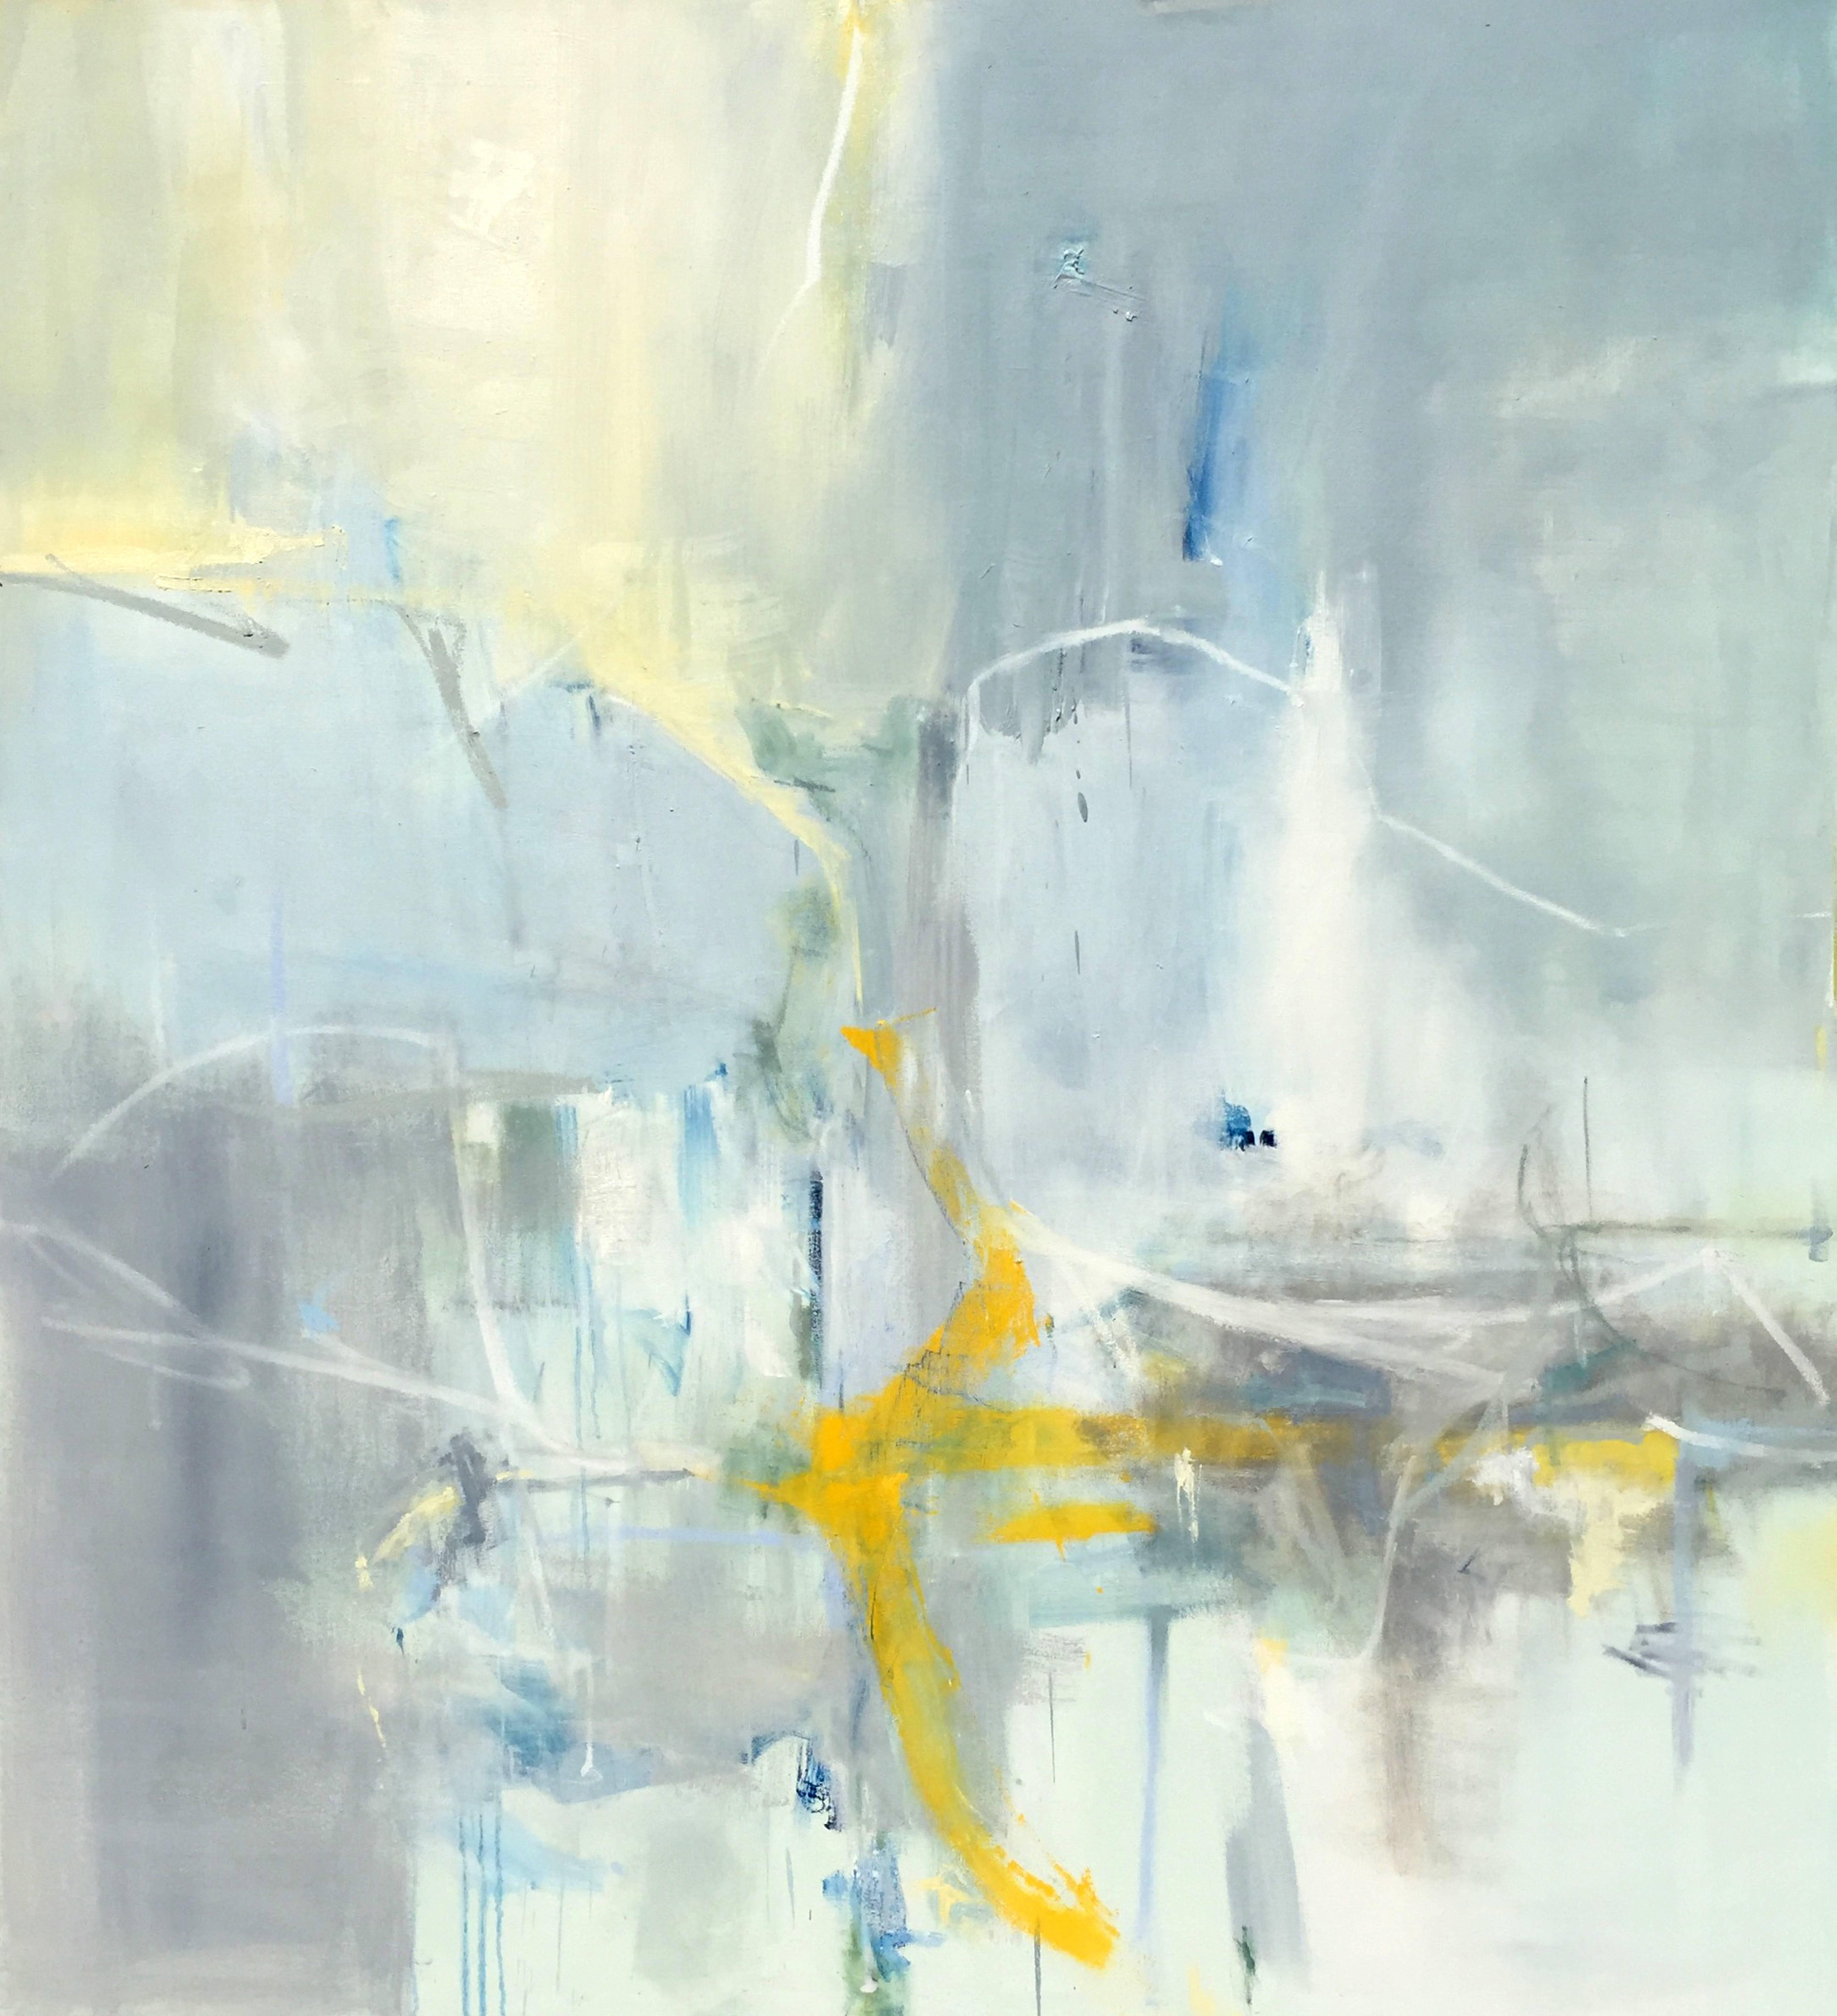 THE YELLOW CHANNEL - Gray Abstract Painting by Emilia Dubicki